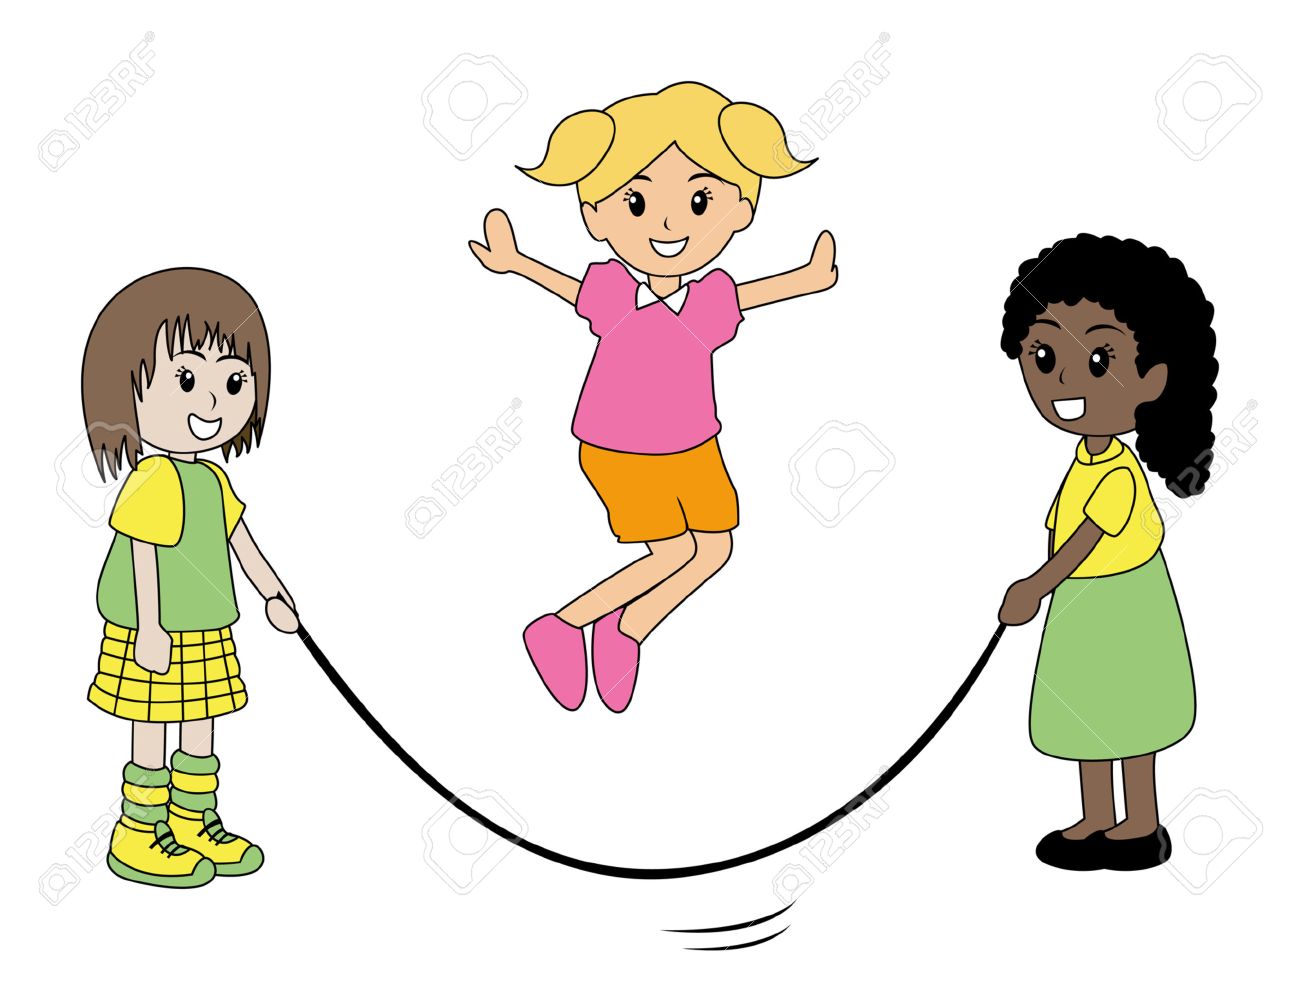 Jumping rope clipart 3 » Clipart Station.